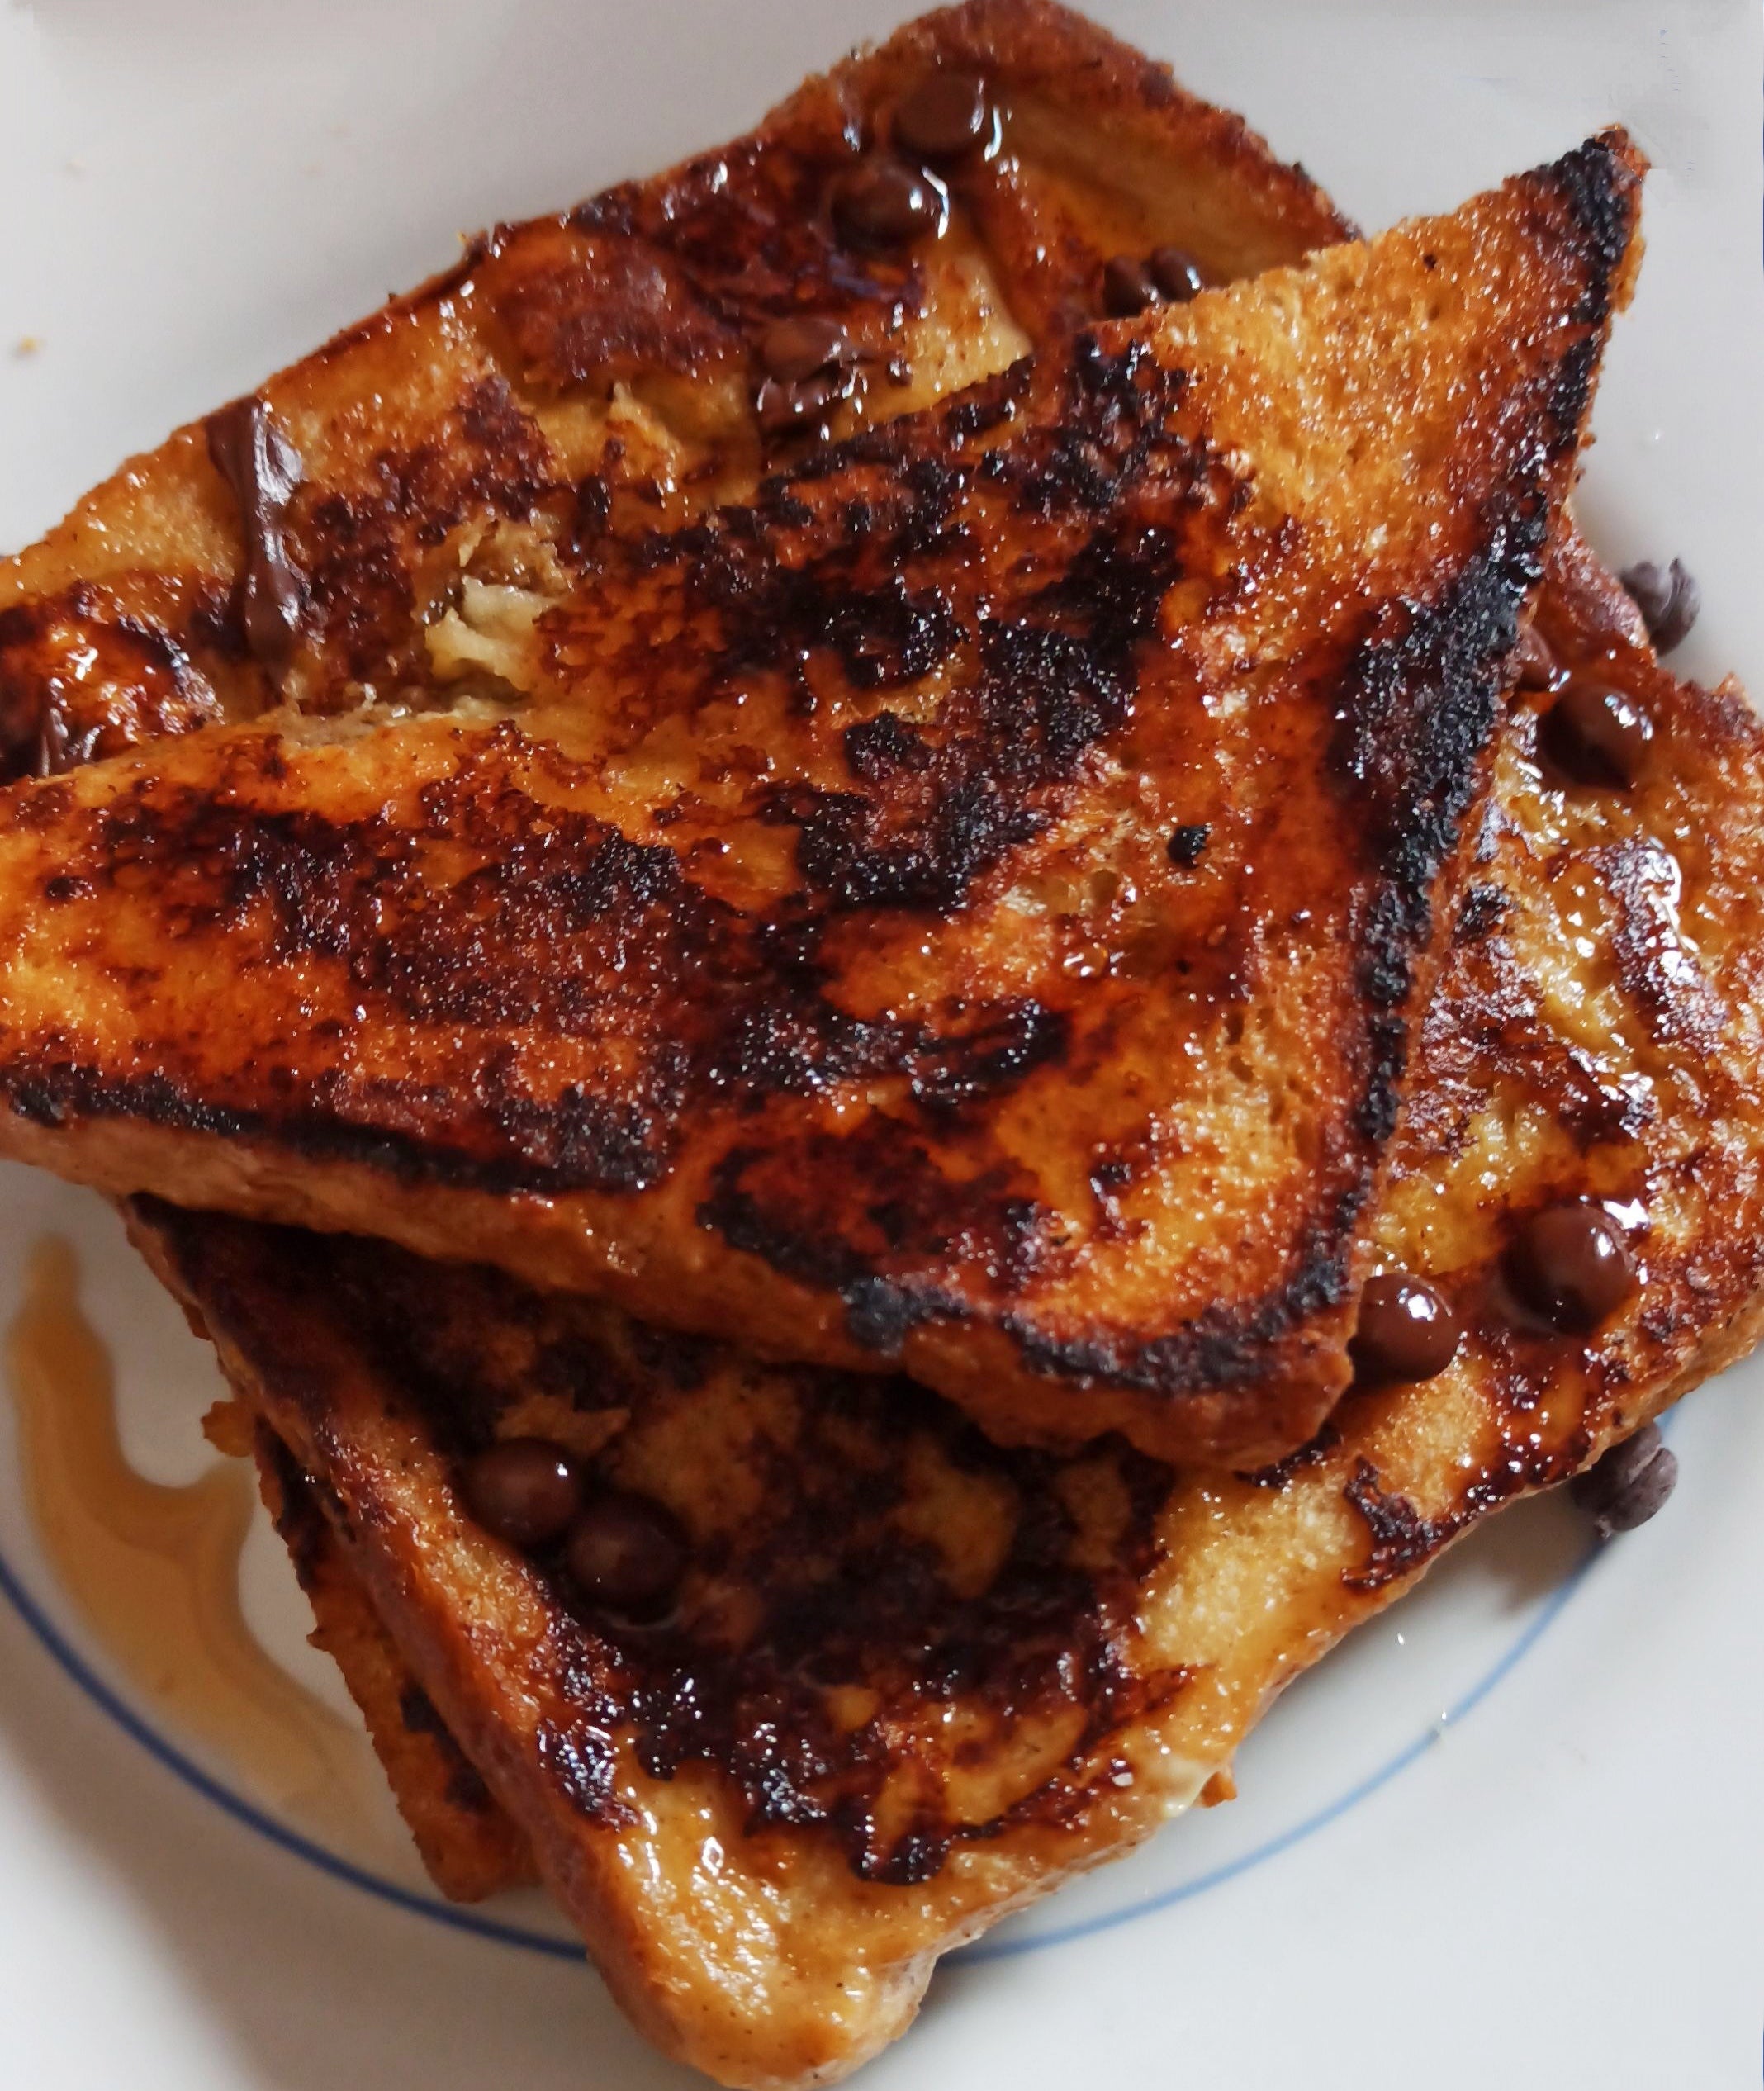 Some nice french toast i had, with chocolate chips and maple syrup ...